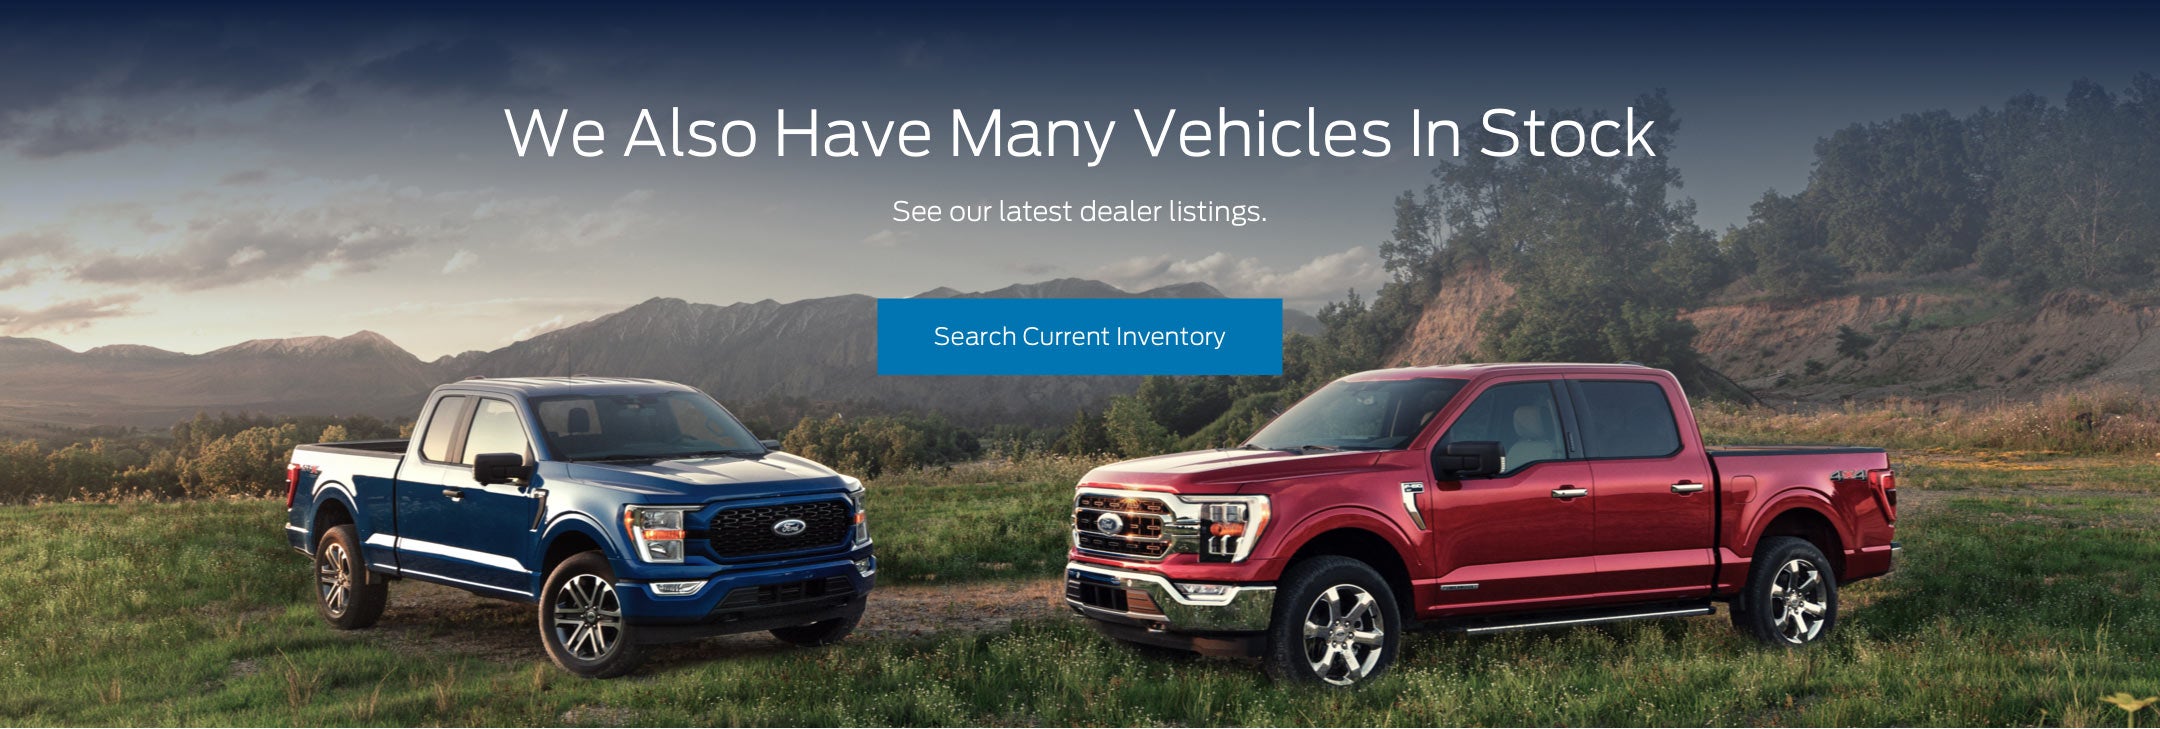 Ford vehicles in stock | Inver Grove Ford in Inver Grove Heights MN